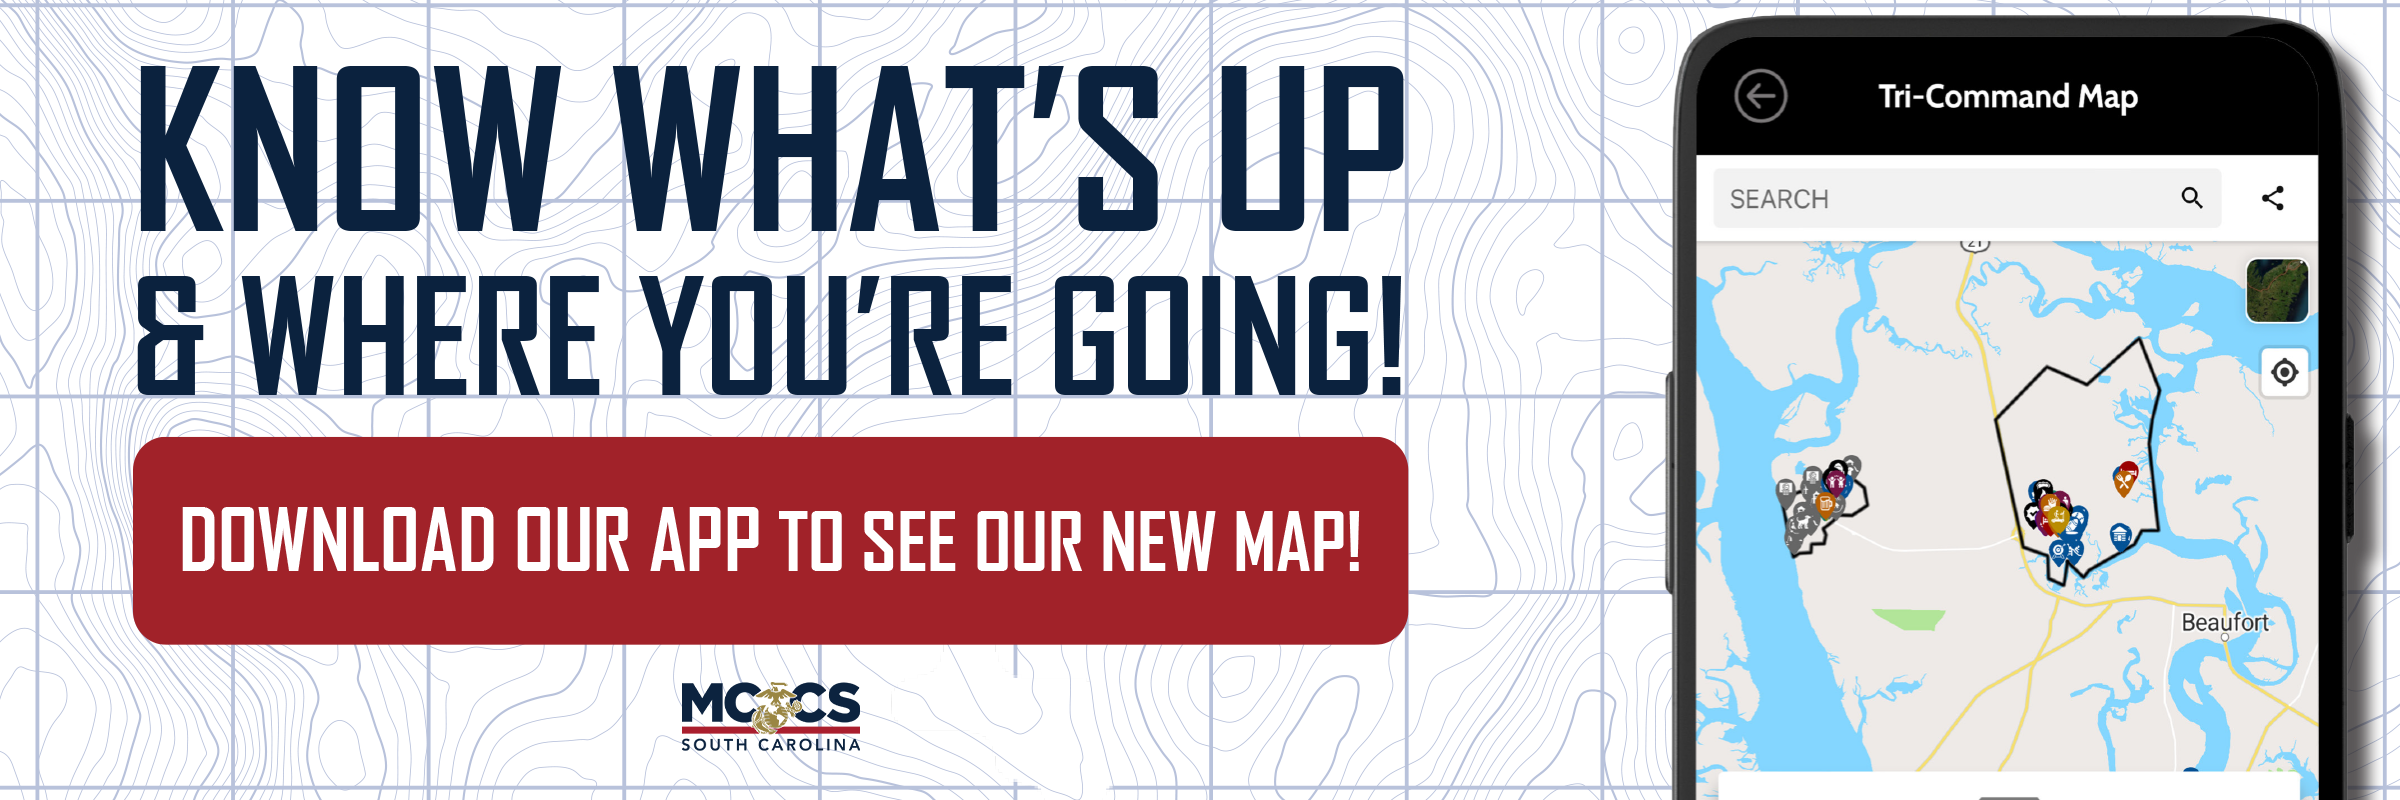 DOWNLOAD OUR APP TO SEE OUR NEW MAP_WEB.png